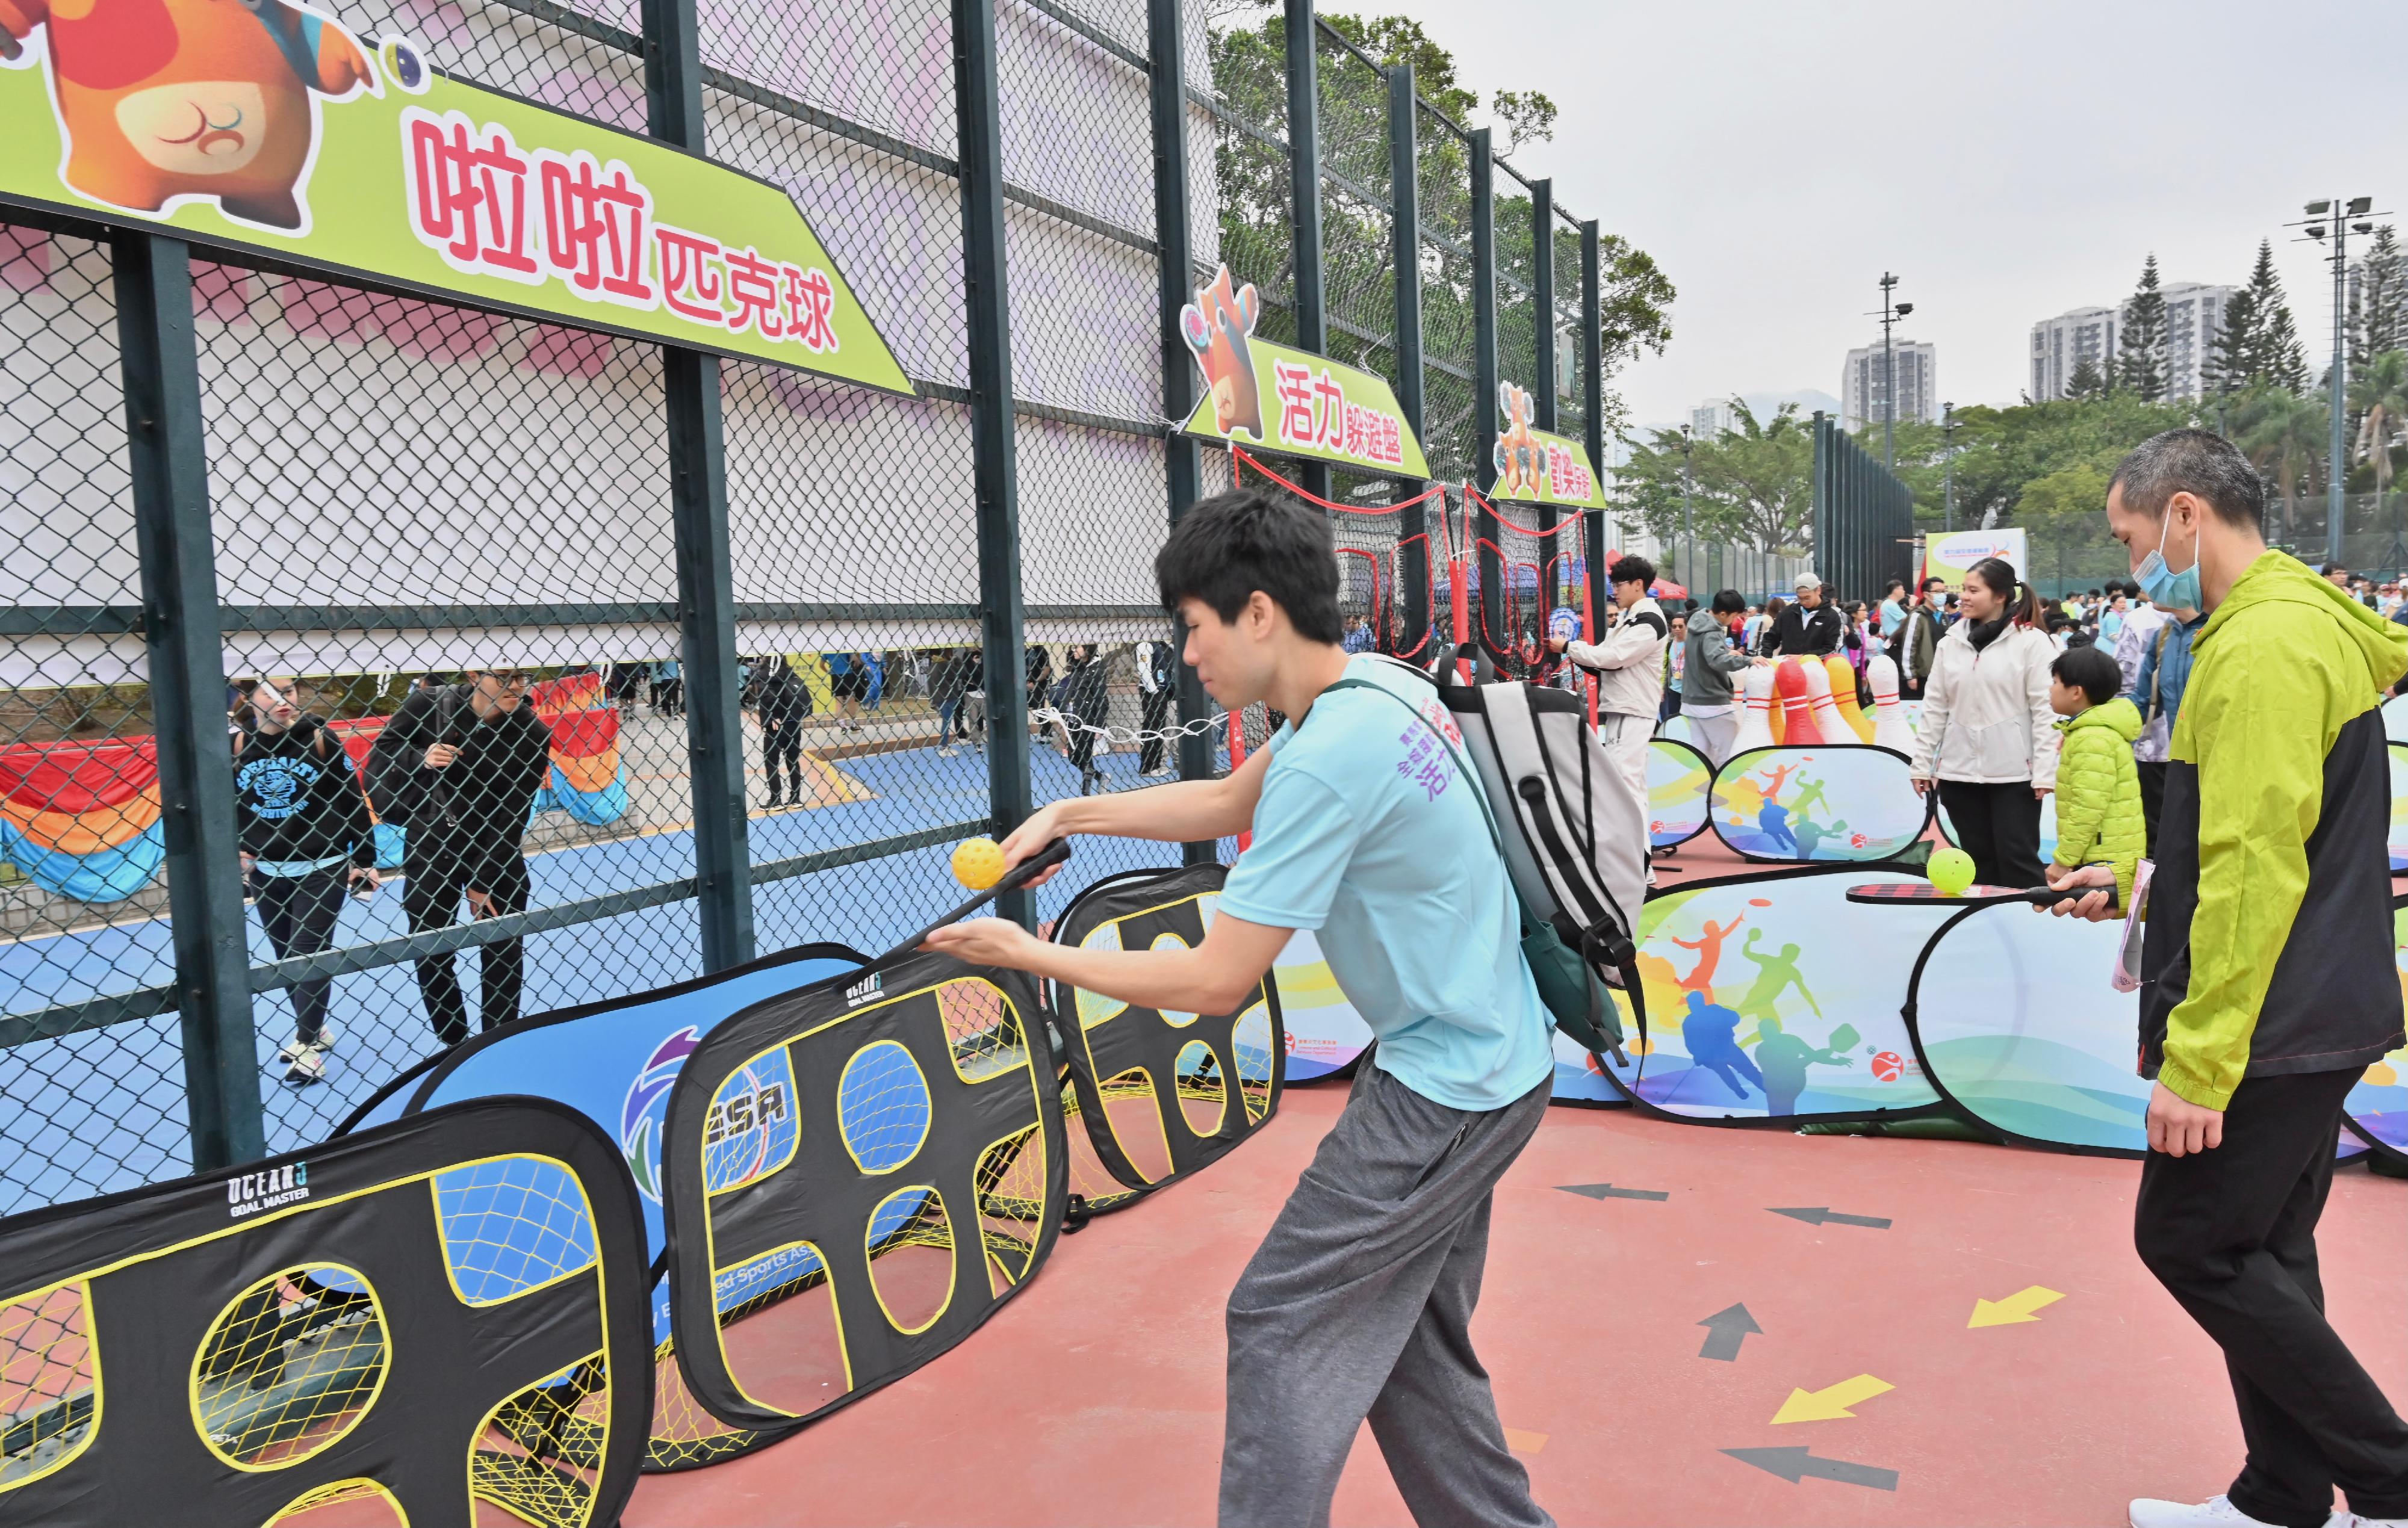 The 9th Hong Kong Games' Jockey Club Vitality Run held a carnival at Yuen Wo Playground Hard-surface Soccer Pitch, Sha Tin, this morning (March 3). Photo shows members of the public participating in a pickleball activity.